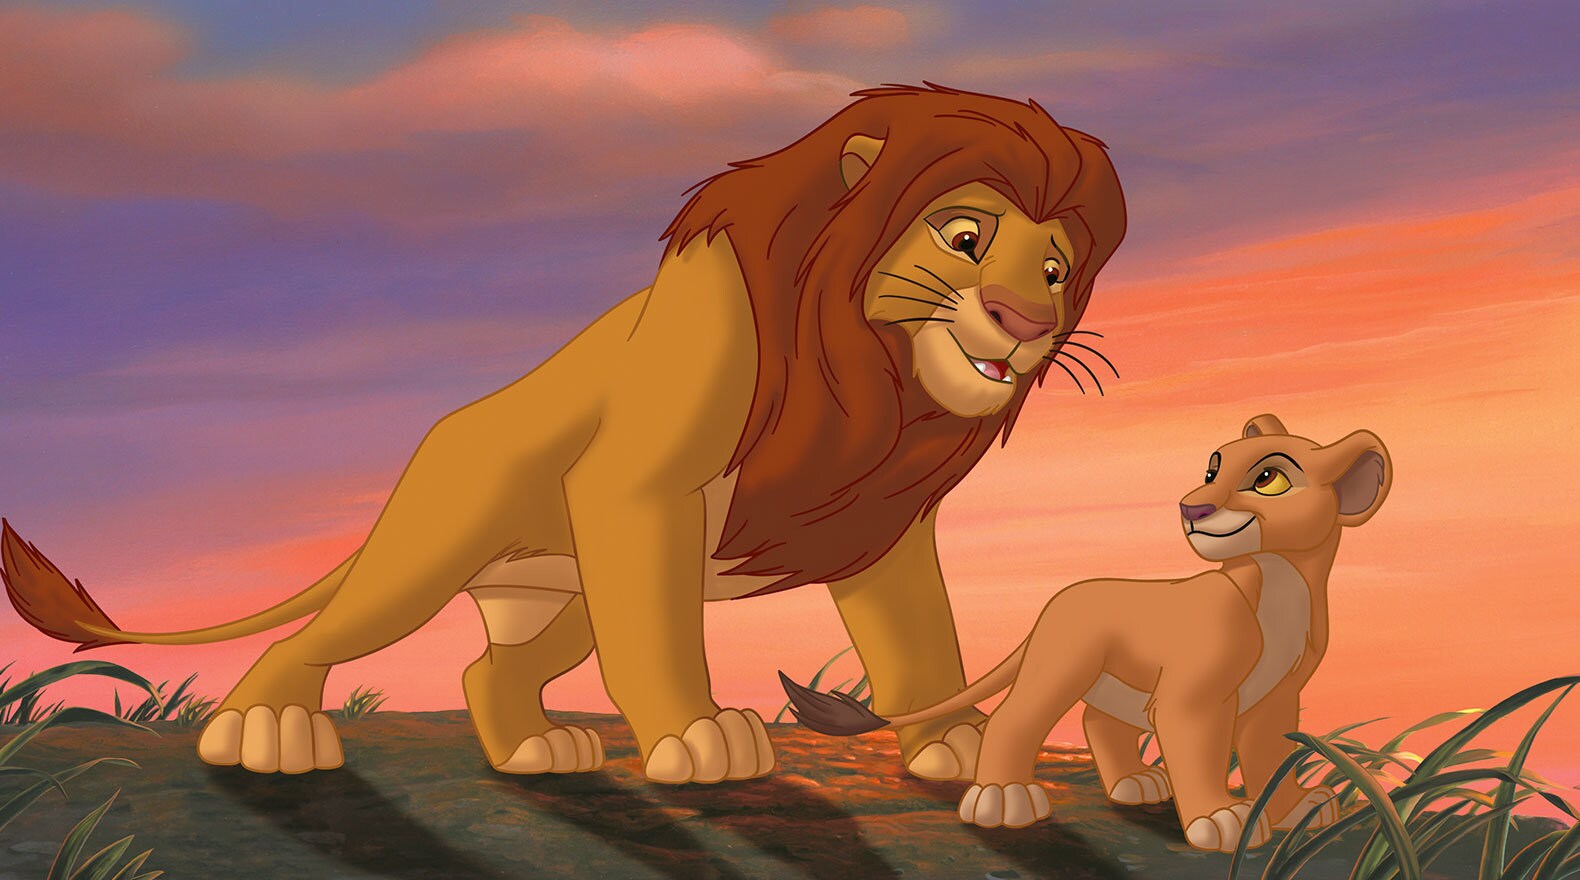 Simba spends time with his daughter, just as his father spent time with him. From the movie "The Lion King II: Simba's Pride" 